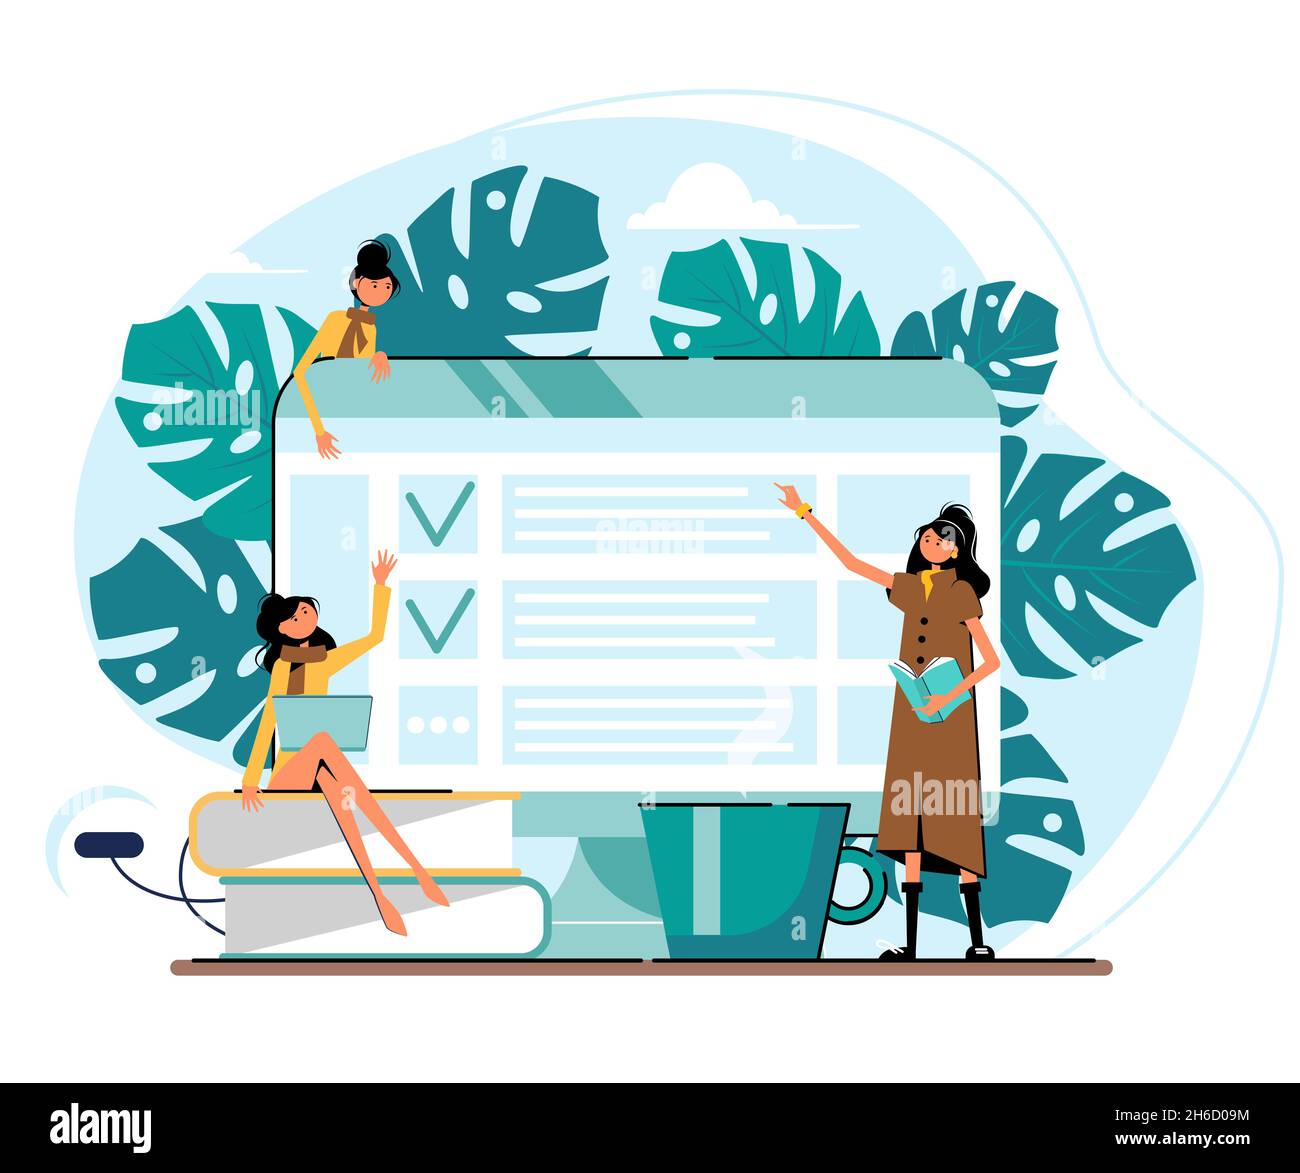 Survey online of customer satisfaction. Computer screen with ticks. Small women characters. illustration in flat style. Stock Vector